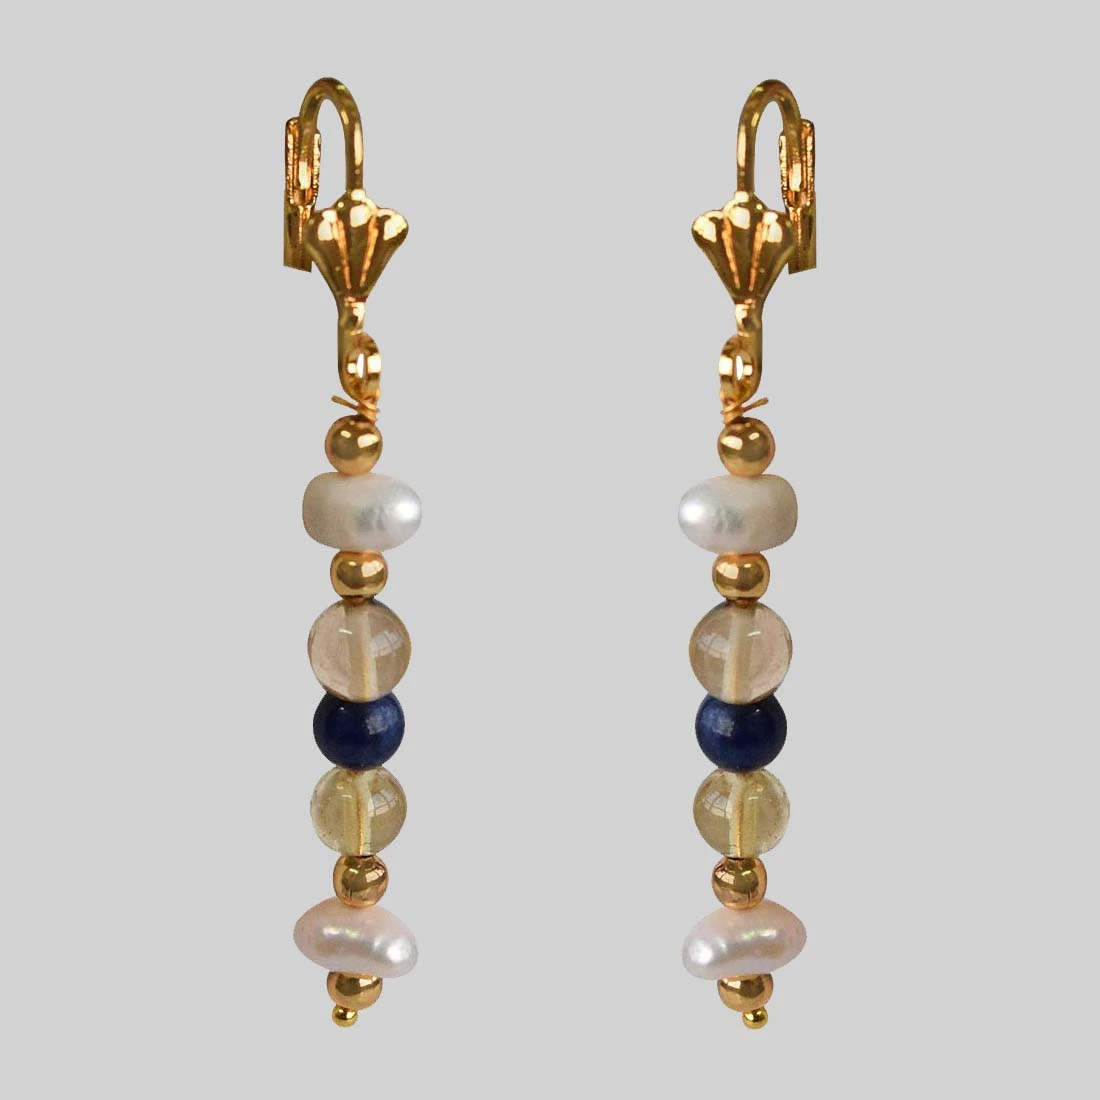 Blue Lapiz, Citrin, Natural Freshwater Pearls and Gold Plated Bead Hanging Earrings for Women (SE338)